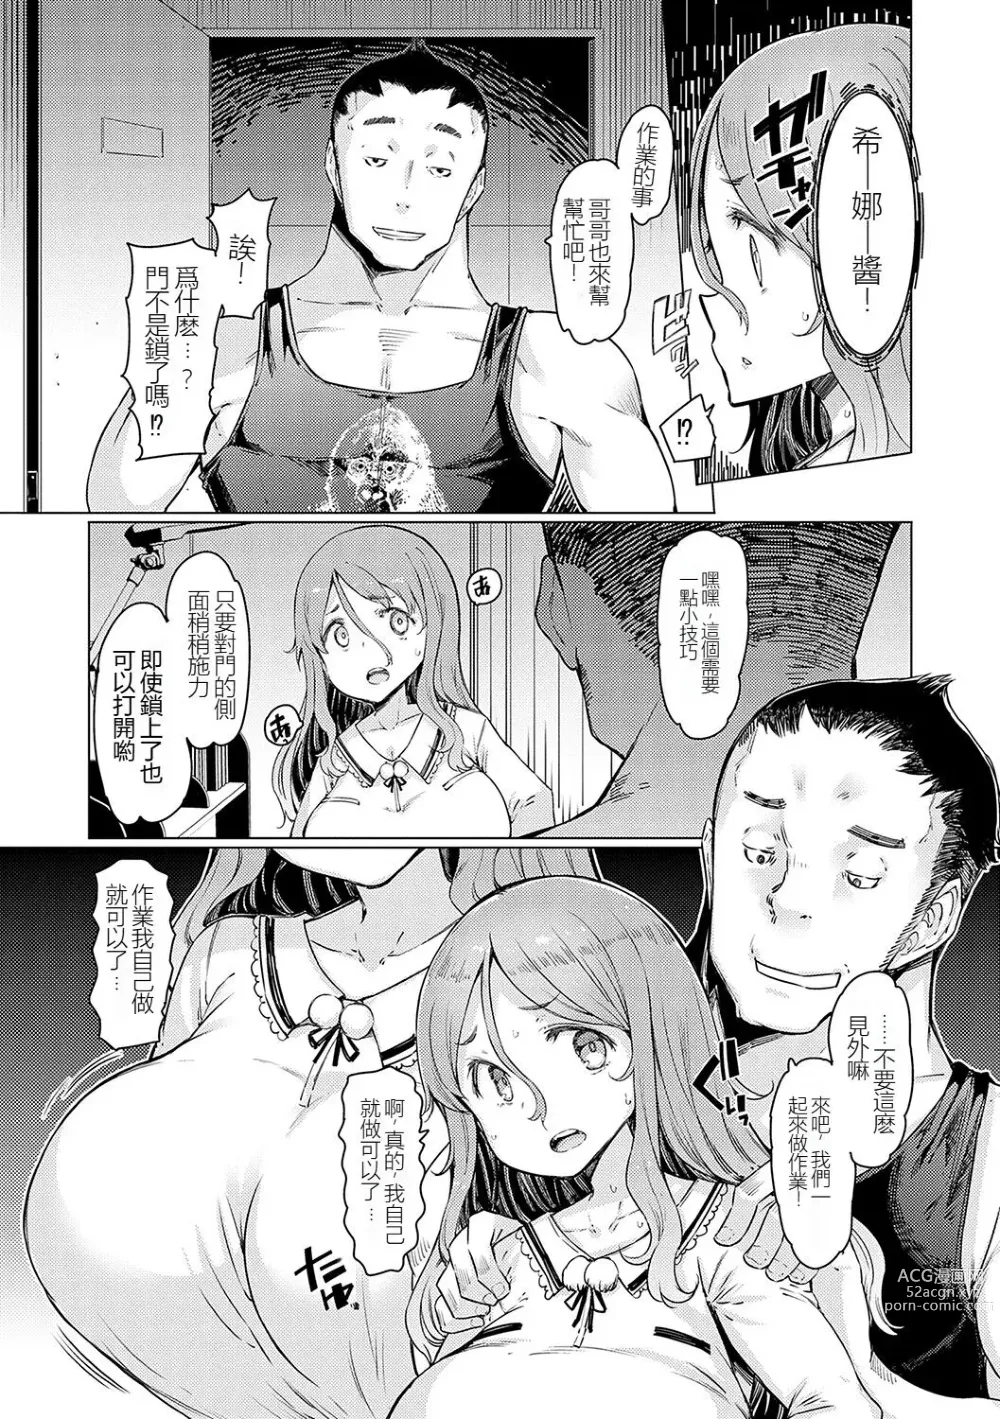 Page 3 of manga Oya no Inai Hi - Parent absent day